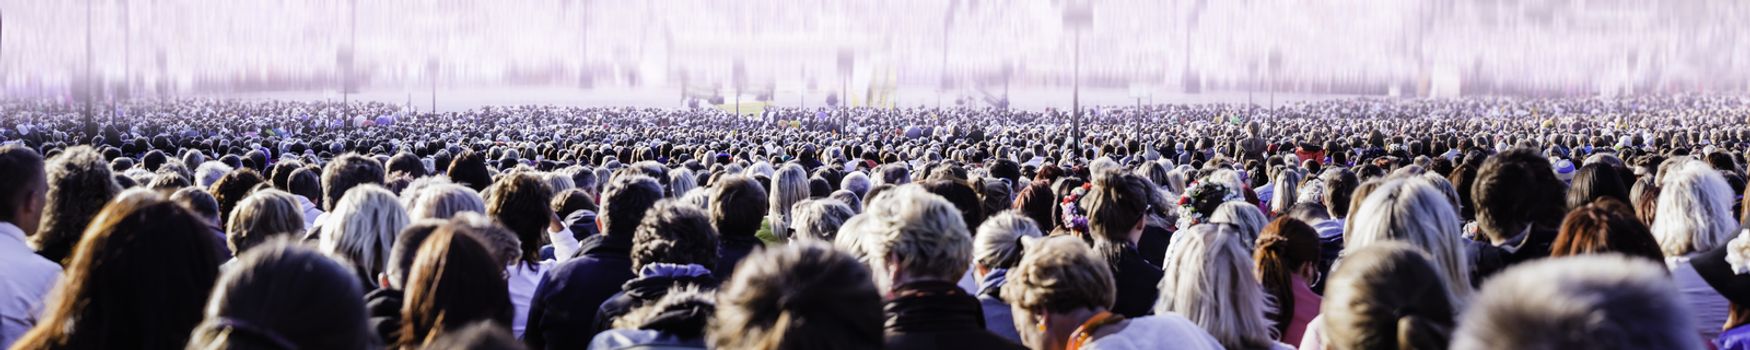 Panoramic photo of large crowd of people. Slow shutter speed motion blur.